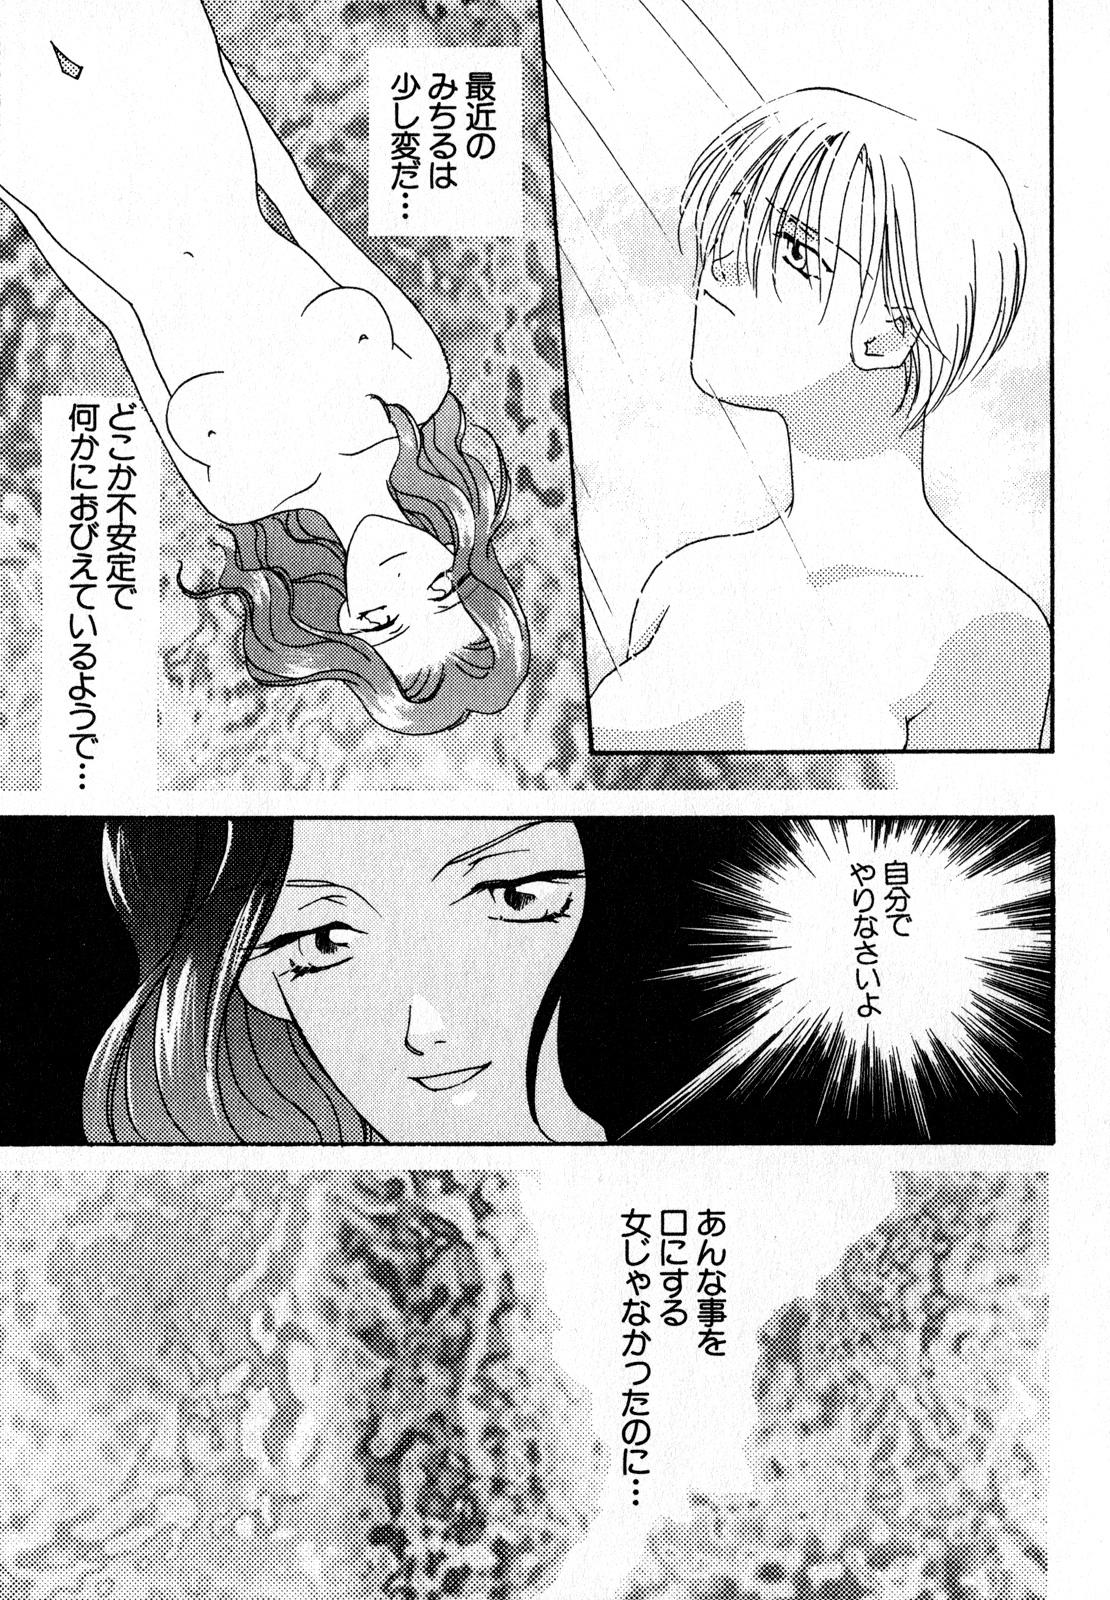 Cheating Lunatic Party 7 - Sailor moon Wetpussy - Page 10